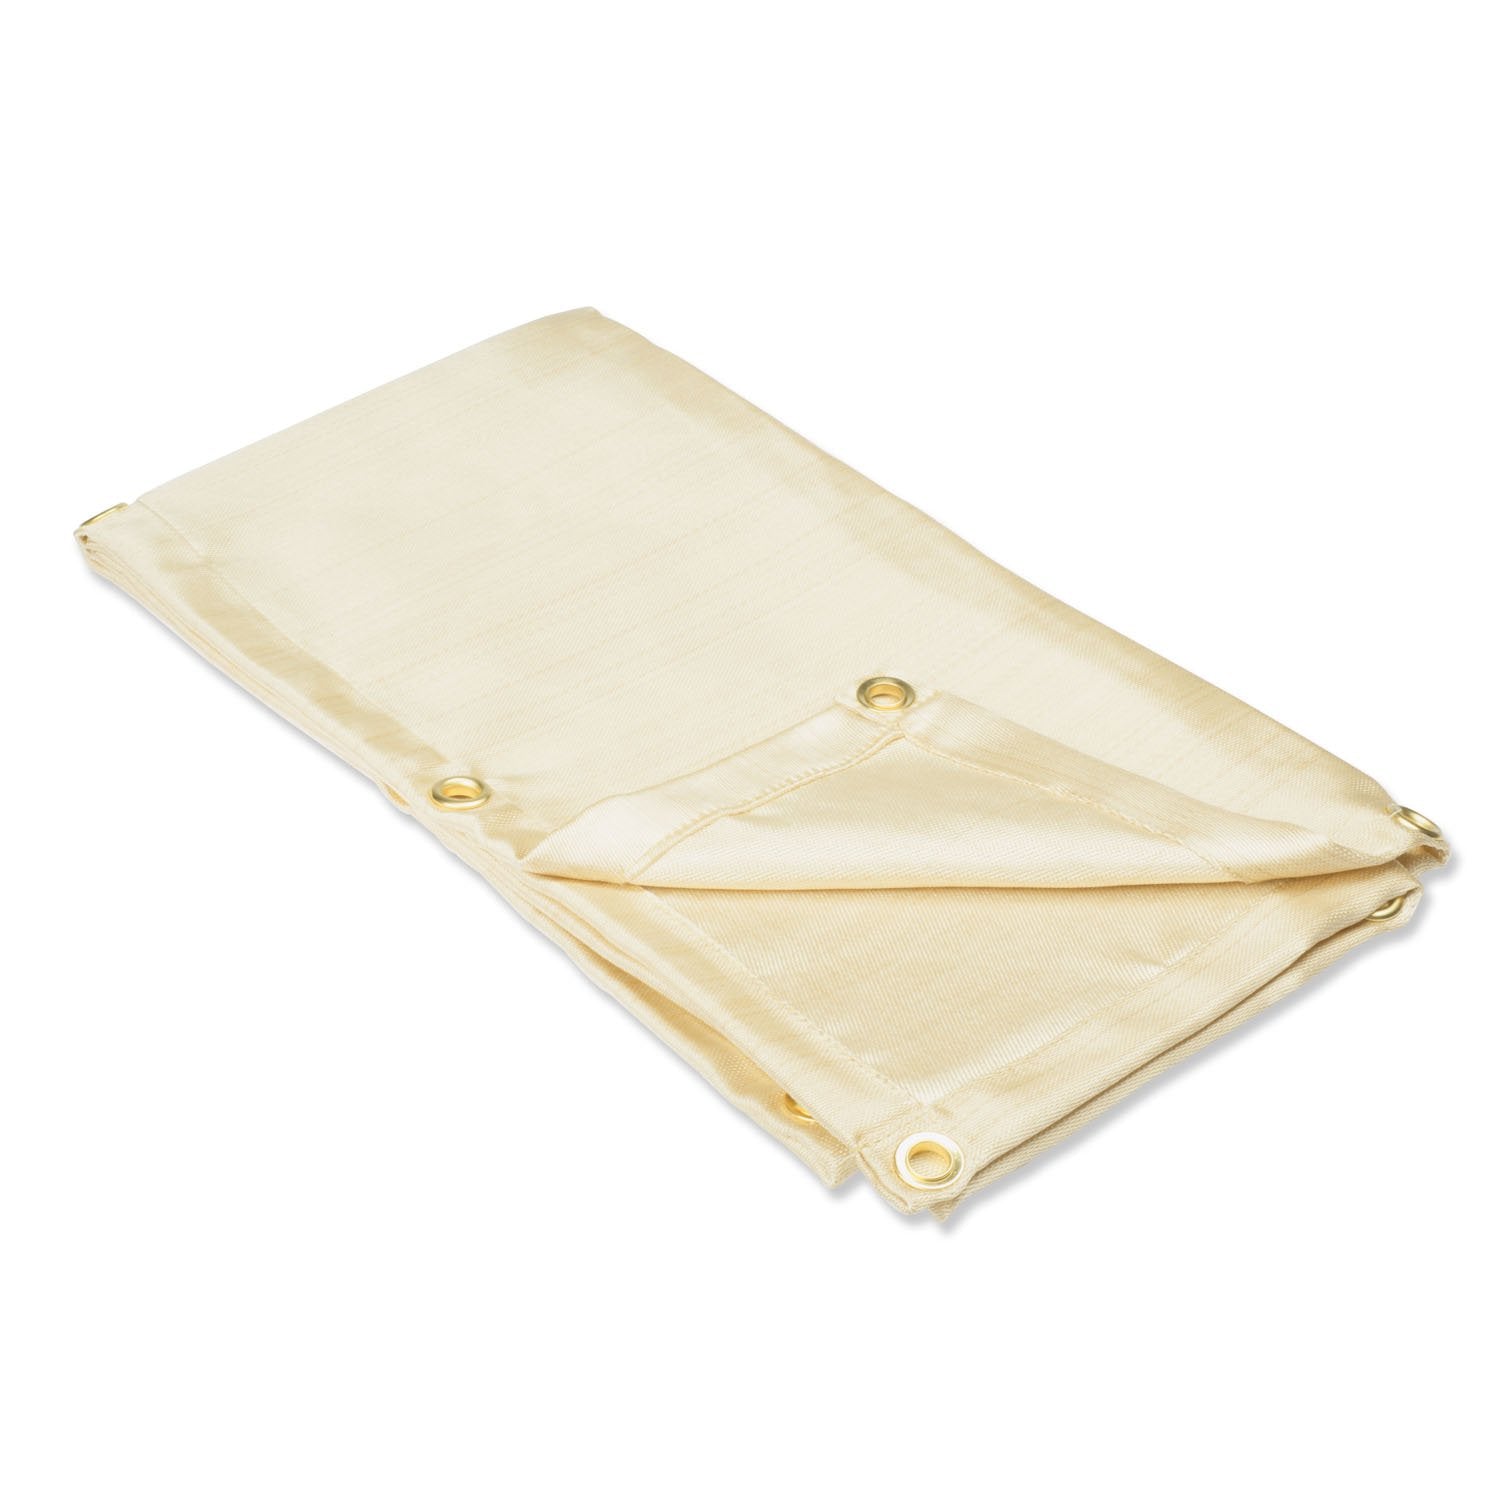 Heavy Duty Fiberglass Welding Blanket and Cover with Brass Grommets 4 -  California Tools And Equipment